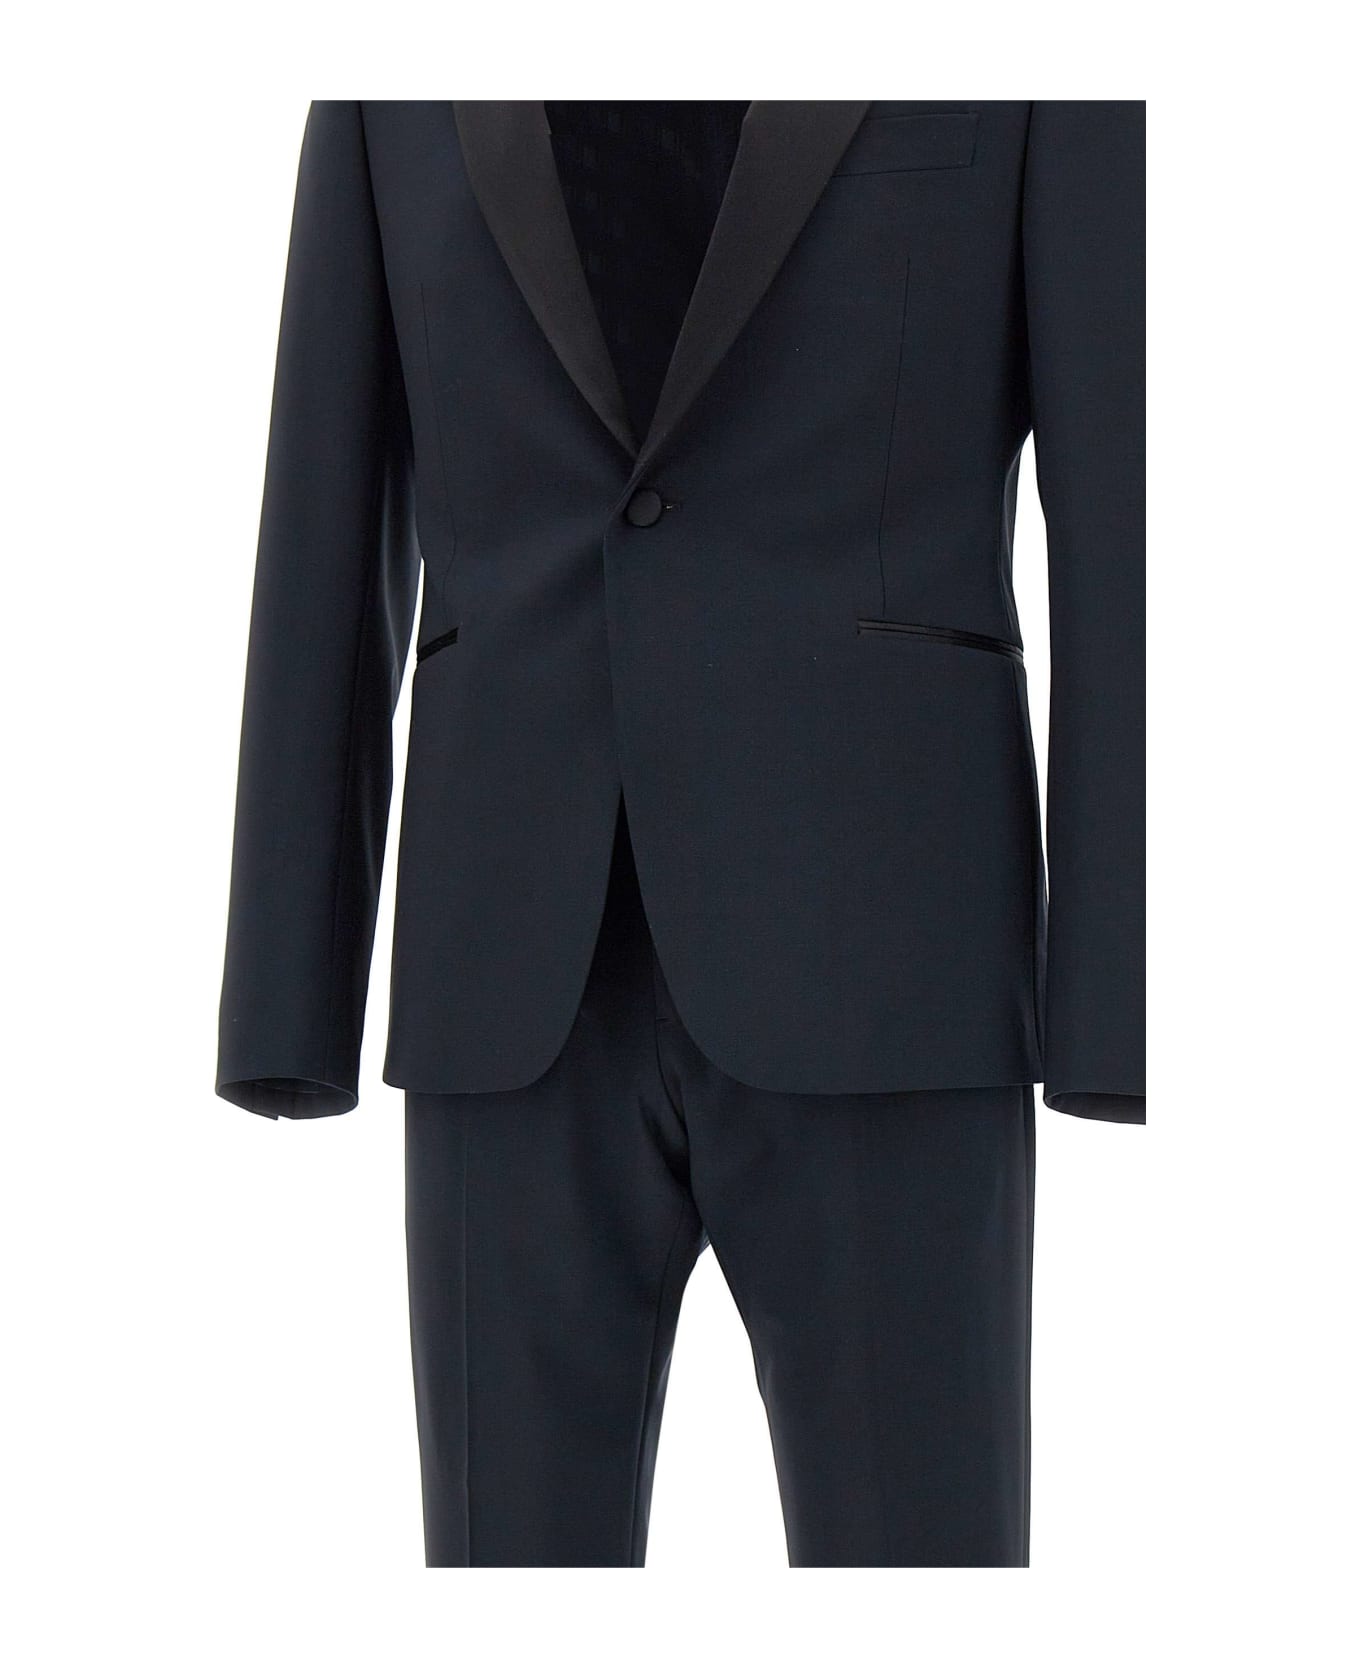 Emporio Armani Fresh Wool Two-piece Formal Suit - BLUE スーツ